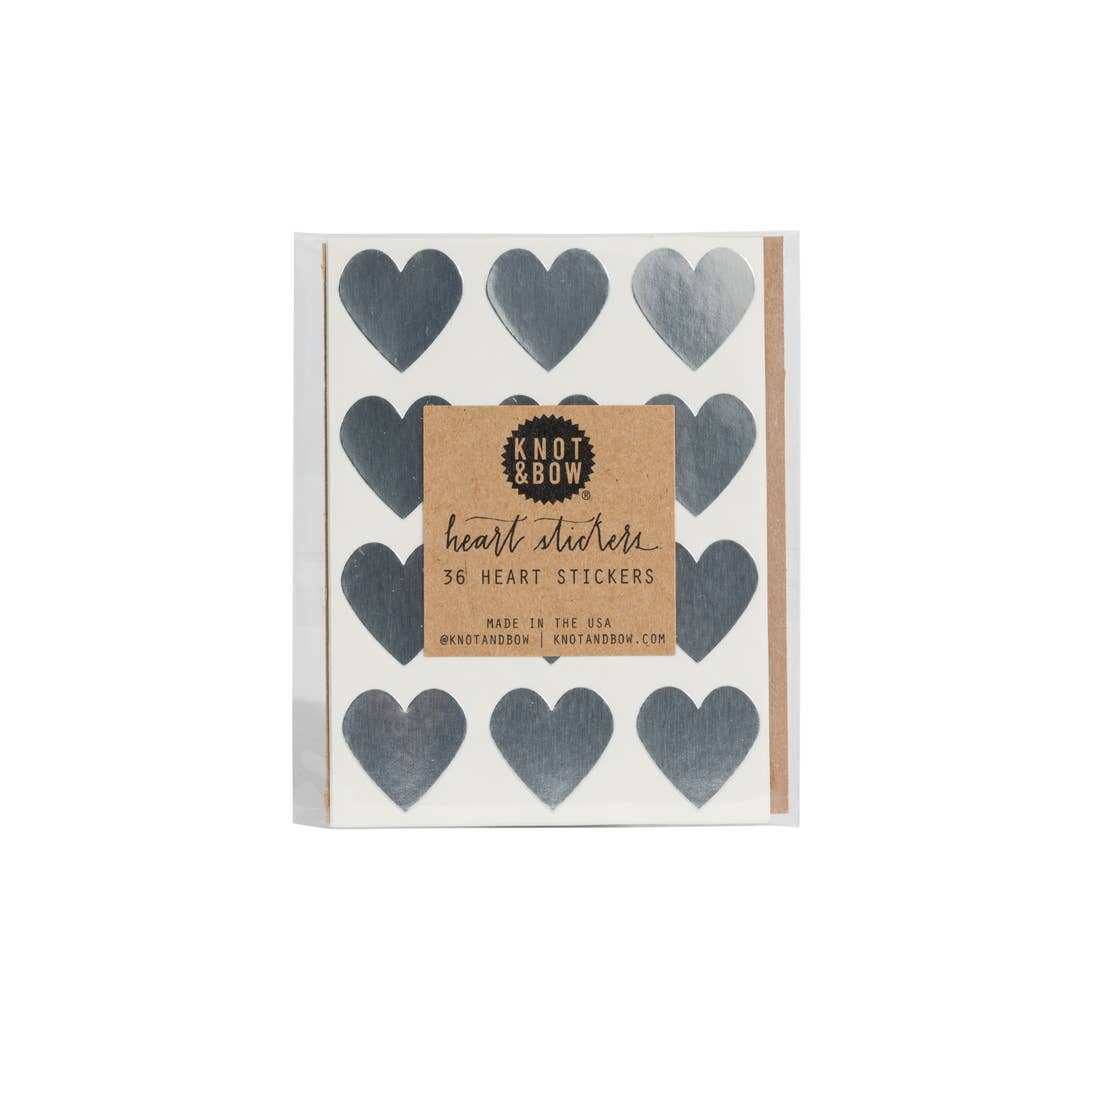 Heart Stickers by Knot & Bow - Silver by Knot & Bow - K. A. Artist Shop